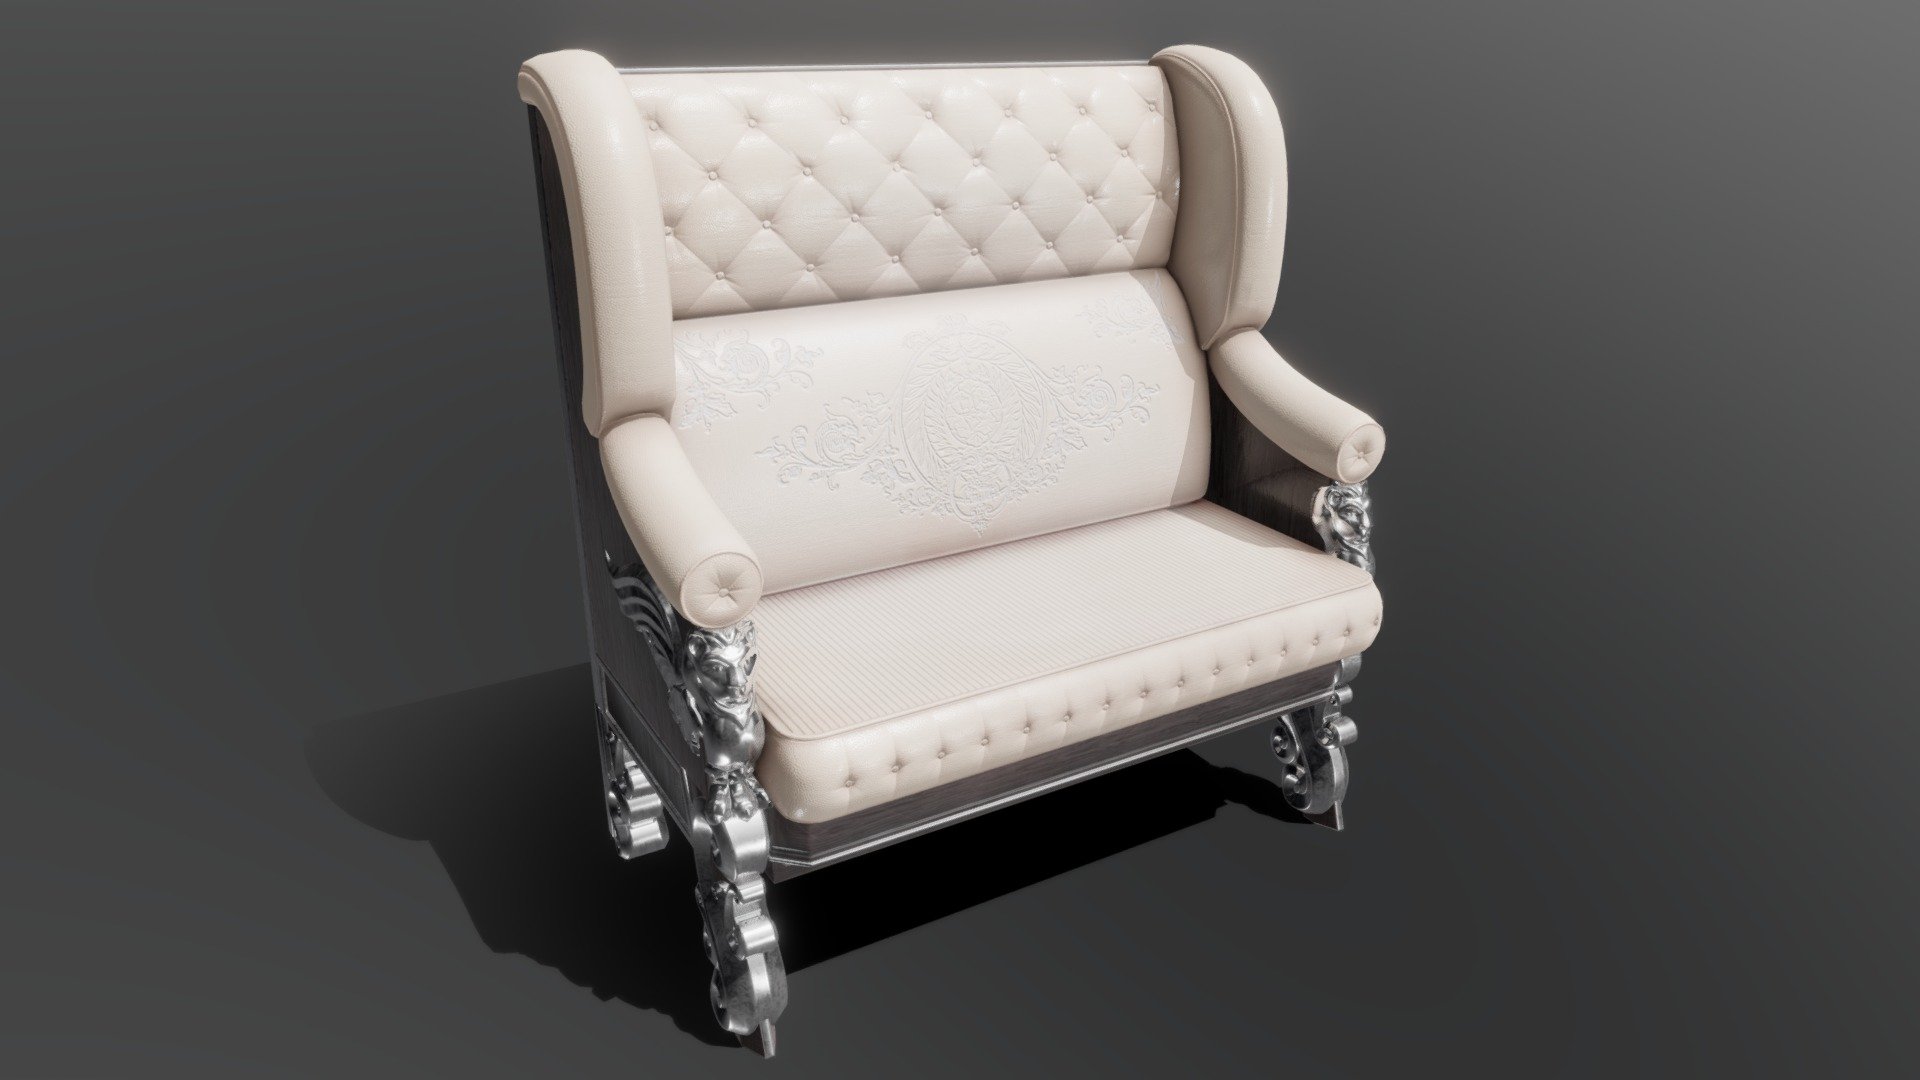 Neoclassical Sofa with Ornaments - Game Asset